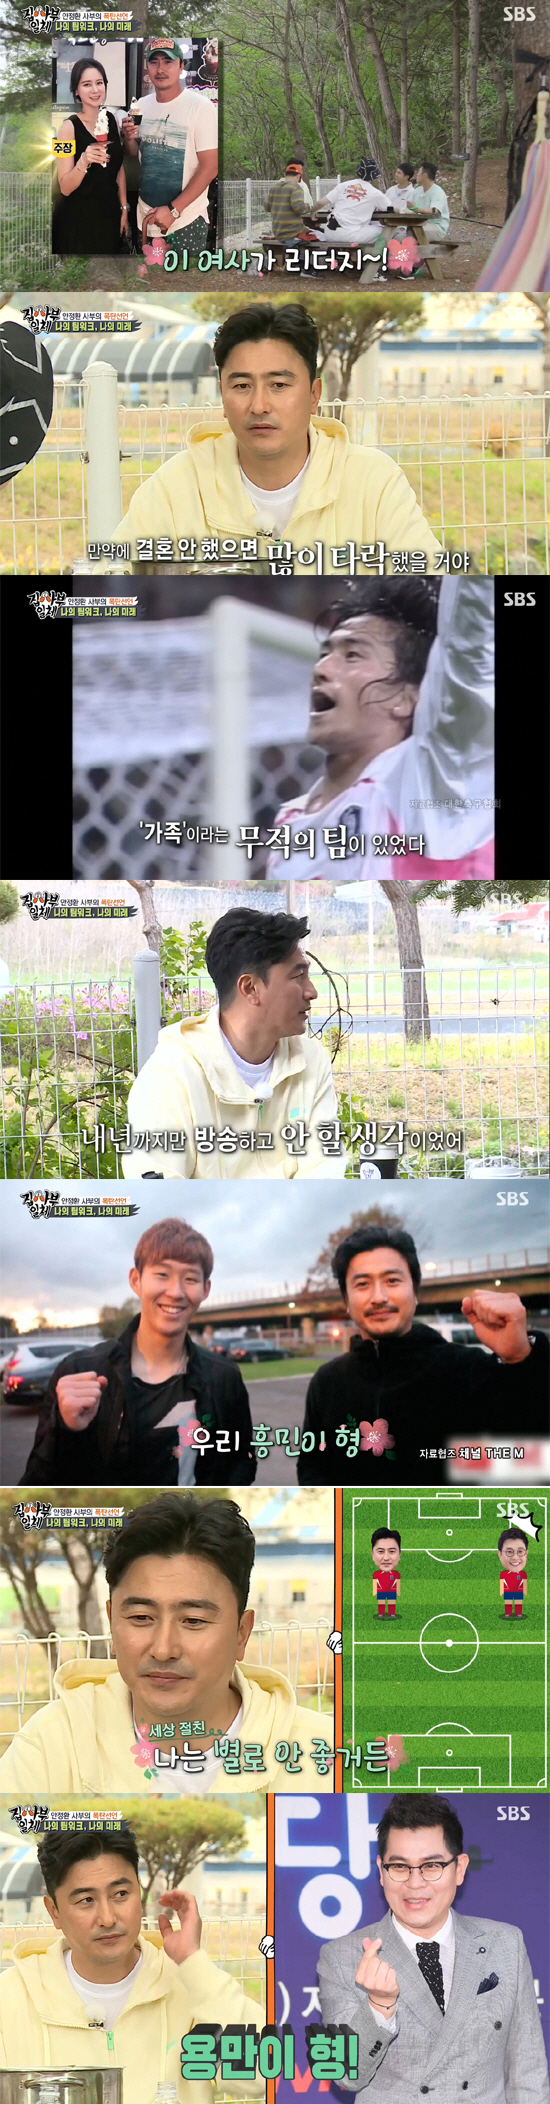 If I didnt get married fast, I would have been a Twisted Justice.Ahn Jung-hwan, a soccer player, said that the leader of the family is his wife, Lee Hye-won.In SBS All The Butlers broadcast on the 16th, Ahn Jung-hwan appeared as master after last week and emphasized the teamwork of the team.Ahn Jung-hwan said: Family life is a teamwork, too - dad or mom could be the leader of the family.It is also a team, he said, asking about the leader of the Ahn Jung-hwan family, saying, Of course, my wife Lee Hye-won. Ahn Jung-hwan said: Every time you do something strangely wrong, that position changes a lot; it keeps stacking up and it happens in an instant.I do not know why I have become such a leader, so the position of the leader has changed. I am glad that I married quickly.I would have been a Twisted Justice if I was alone because the environment I grew up was seductive. Ahn Jung-hwan also joked about his best friend Kim Sung-joo, saying, I do not like him very much.The first impression was not good, but unexpectedly good, said Kim Yong-man. Kim Yong-mans first impression was not good, but there is no reason to hate it.I really did not fit with me, but the more I know, the more I respect it. He said, I went on a trip on the air and Yongman was sick.I took care of him because I was a player, and he did not sleep with the air conditioner in the hot, and later he really appreciated that part. As for the future plans, he declared the bomb, I will not broadcast and do it until next year. The production team was also nervous.Lee Seung-gi asked, That fast? and Ahn Jung-hwan said, Once you think about it, thats what youre doing.It is not decided whether to go back to football or study, but it is a personal plan. If you stop suddenly (playing the broadcast) what youre doing, its a public affair, no, no, no, no, no, no, no, no, no, no, no, no, no, no, no, no, no, no, no, no, no, no, no, no, no, no, no, no, no, no,I do not think I can laugh, be handsome, sing or act well, or fight well. I may study to be a leader, but I am also worried about running the ground again. Ahn Jung-hwan said: I dont like talking about 2002, but then the teamwork was really good, the candidates are very heartbroken.But no one was impressed when the candidates were shown on camera. Everyone was a team.It is the best ace when you go to your team, but it is the result of sacrificing and caring for you. He emphasized the importance of the team once again.Lee Seung-gi said, There are several sports stars in Korea, but there is a speciality with the name of Ahn Jung-hwan.Park Ji-sung is different from his brother, but when Park Ji-sung is Hero, Ahn Jung-hwan is a star. Ahn Jung-hwan said, Who does not heal?Why do I come out and pick up Park Ji-sung? He said, I am a brother if I have more money than me.The cooler footballer than Ronaldo Messi is Ahn Jung-hwan, said Cha Jung Eun-woo, who received the pass of Ahn Jung-hwan.Earlier, Ahn Jung-hwan started training for four people to get the ball together.Members pointed at the same time and Yang Se-hyeong was crooked when Yang Se-hyeong missed the ball due to poor performance.The training followed the mission of four members in 20 seconds of Exercise. The members resigned to the slower record as they tried to run to the chin.Lee Seung-gi said, I thought you hated Hiddink. We are not going to the World Cup.Ahn Jung-hwan tied the wrists of four people and gave them 38 seconds, saying, A fast person should push and do it behind.The four men passed the mission with 25 seconds as a member came out to play outside while placing the unable Yang Se-hyeong inside and caring.Yang Se-hyeong, who was the most sluggish, cheered, I am not alone, but Yi Gi, so I think it is so joyful.All The Butlers members accused Hiddink of hating him when he was a player, I think thats true, and Ahn Jung-hwan said, I hate it?Thank you, he said.Yang Se-hyeong said, I am sorry that I am the worst.I feel more grateful for the members to attract, Ahn Jung-hwan advised. It is a training to feel that. Kim Dong-Hyun said, When I originally ran, I saw the side while watching the hard work of the three types. Ahn Jung-hwan said, I also care for each other.They build up a team that they can not play outside. Teamwork happens. It is a true team when it is hard. Lee Seung-gi said, We are so hard, but it would have been harder when we were players. Ahn Jung-hwan said, I went to the shower to wash after training, but the secretion on my pants ... I felt it.Im literally a liar, said Jung Eun-woo, who said, I cant smell it, and its weird. Smell-no-deaf.I cant hear a single one with 50,000 people sitting there, said Lee, who was using his extreme physical strength during his career.All The Butlers team ate the white soup prepared by Ahn Jung-hwan and wanted to eat ramen noodles. They took the ingredients from Yang Se-hyeong tea, tied their hands, fed each other, and ate ramen noodles deliciously.In subsequent training, Ahn Jung-hwan promised to let me out of the afternoon training if the four people were Yi Gi, and the members were burned to resolution.The four men who tied their hands played football penalty battle with Ahn Jung-hwan, and Ahn Jung-hwan, who kicked the ball with his left foot, eventually lost the winning goal.Ahn Jung-hwan said, There is no individual stronger than the team.There will be no teamwork like All The Butlers among all the entertainment teams, said Jung Eun-woo. It is Feelings who became a more team with their brothers today.